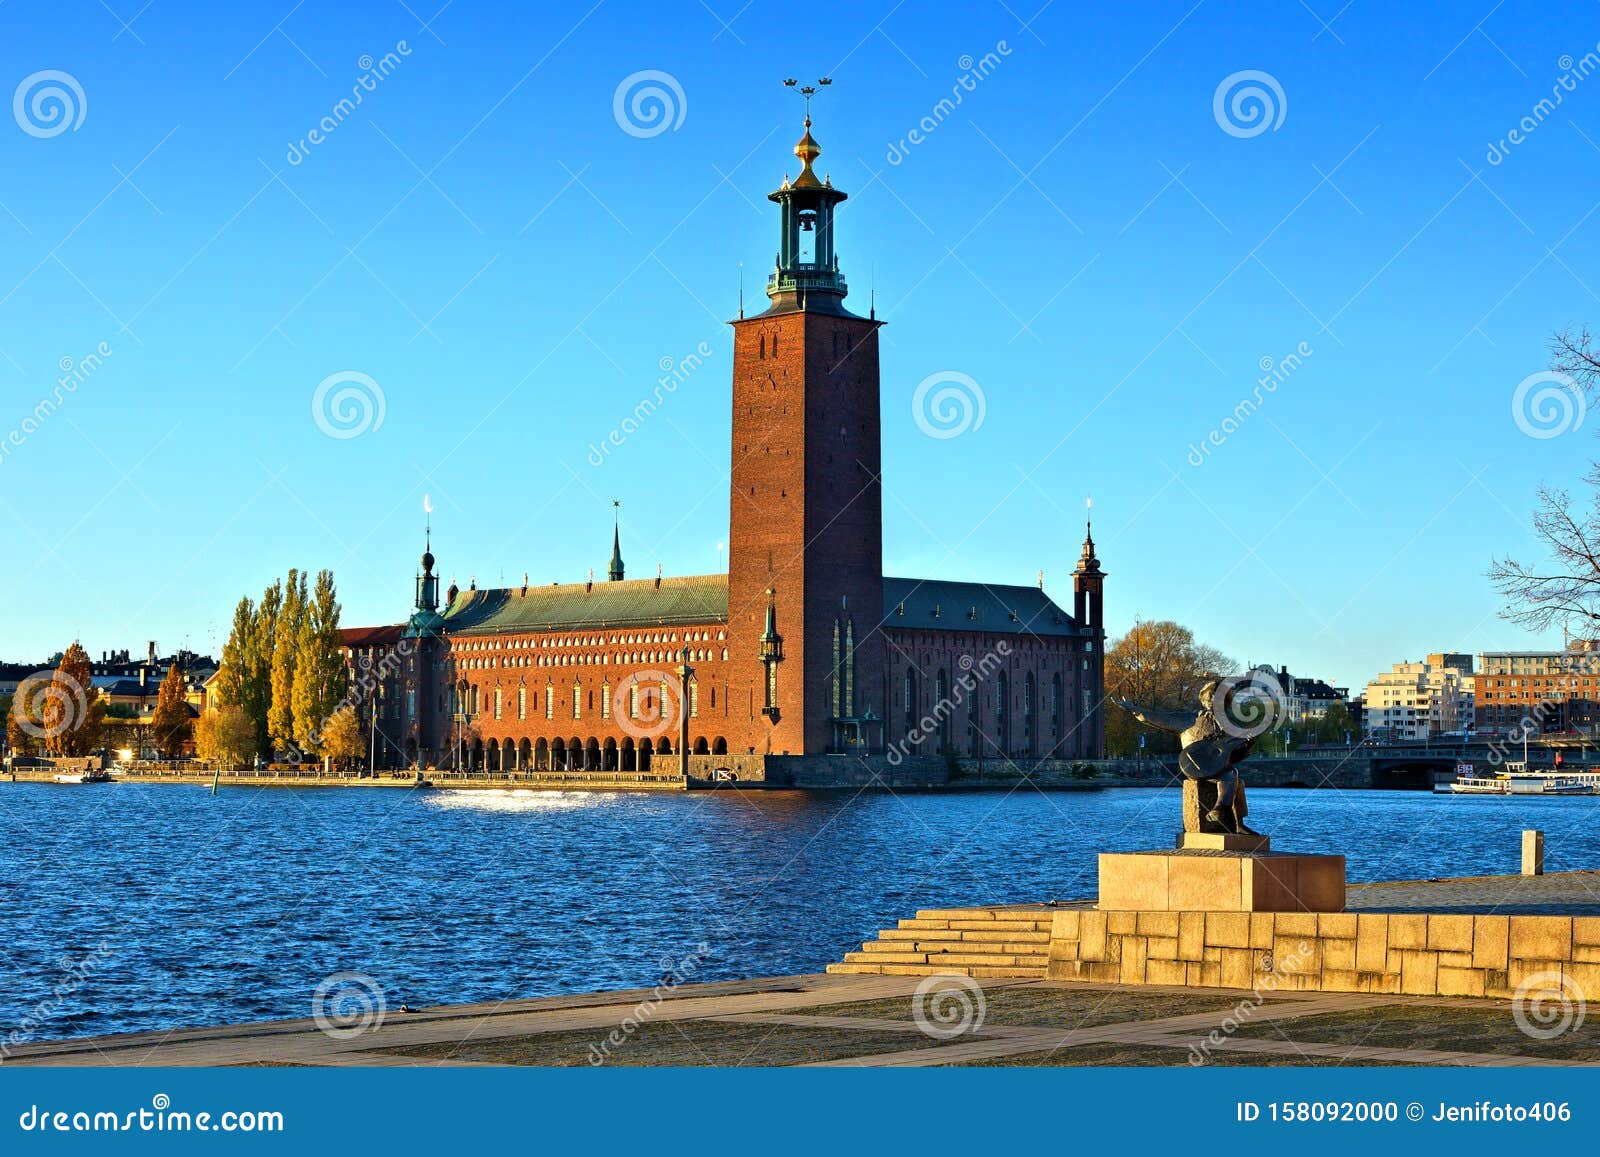 Stockholm Sweden View Of City Hall Near Sunset Stock